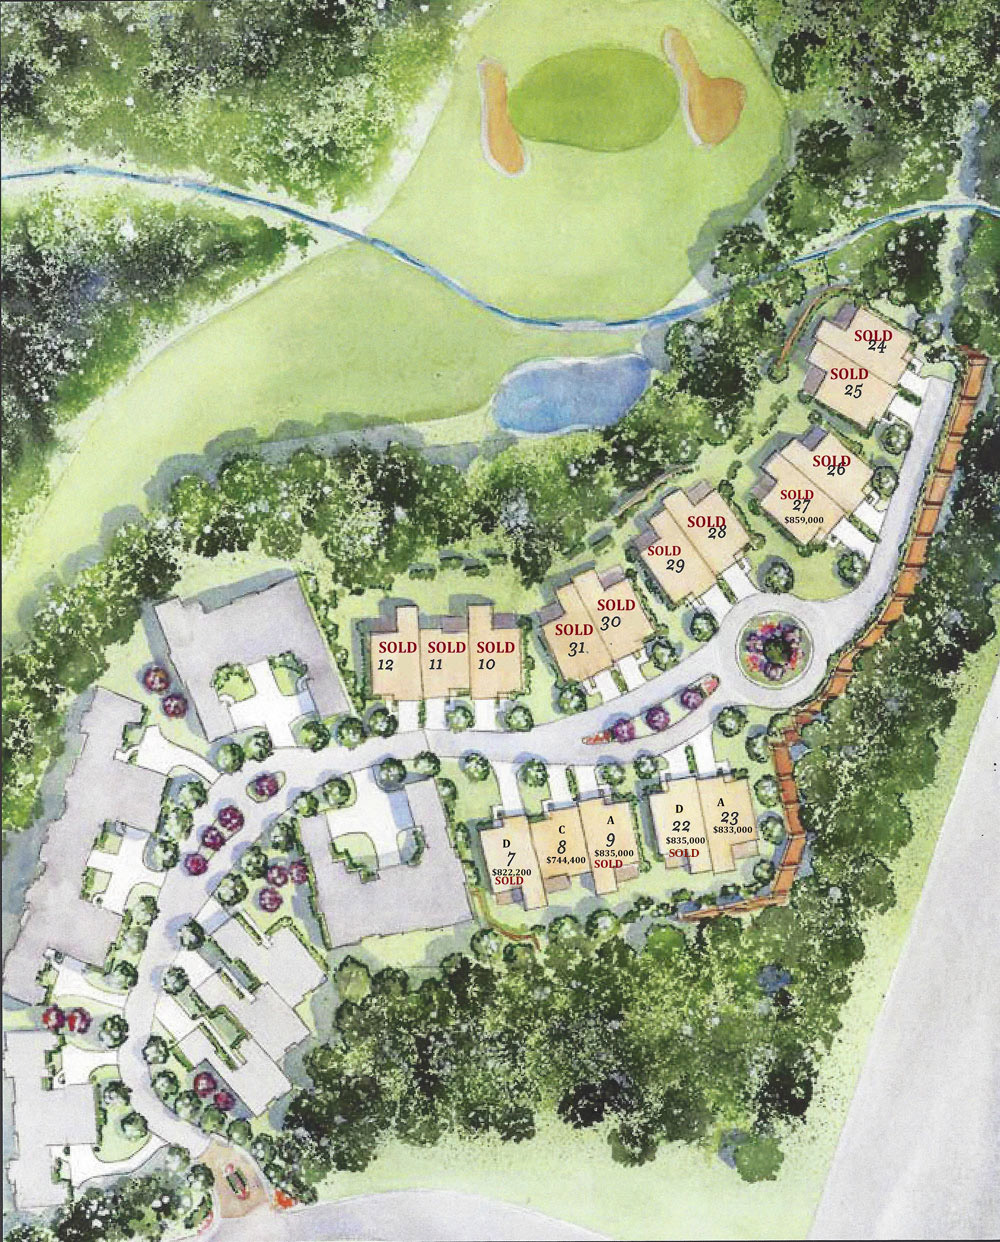 Balmoral available homes site map